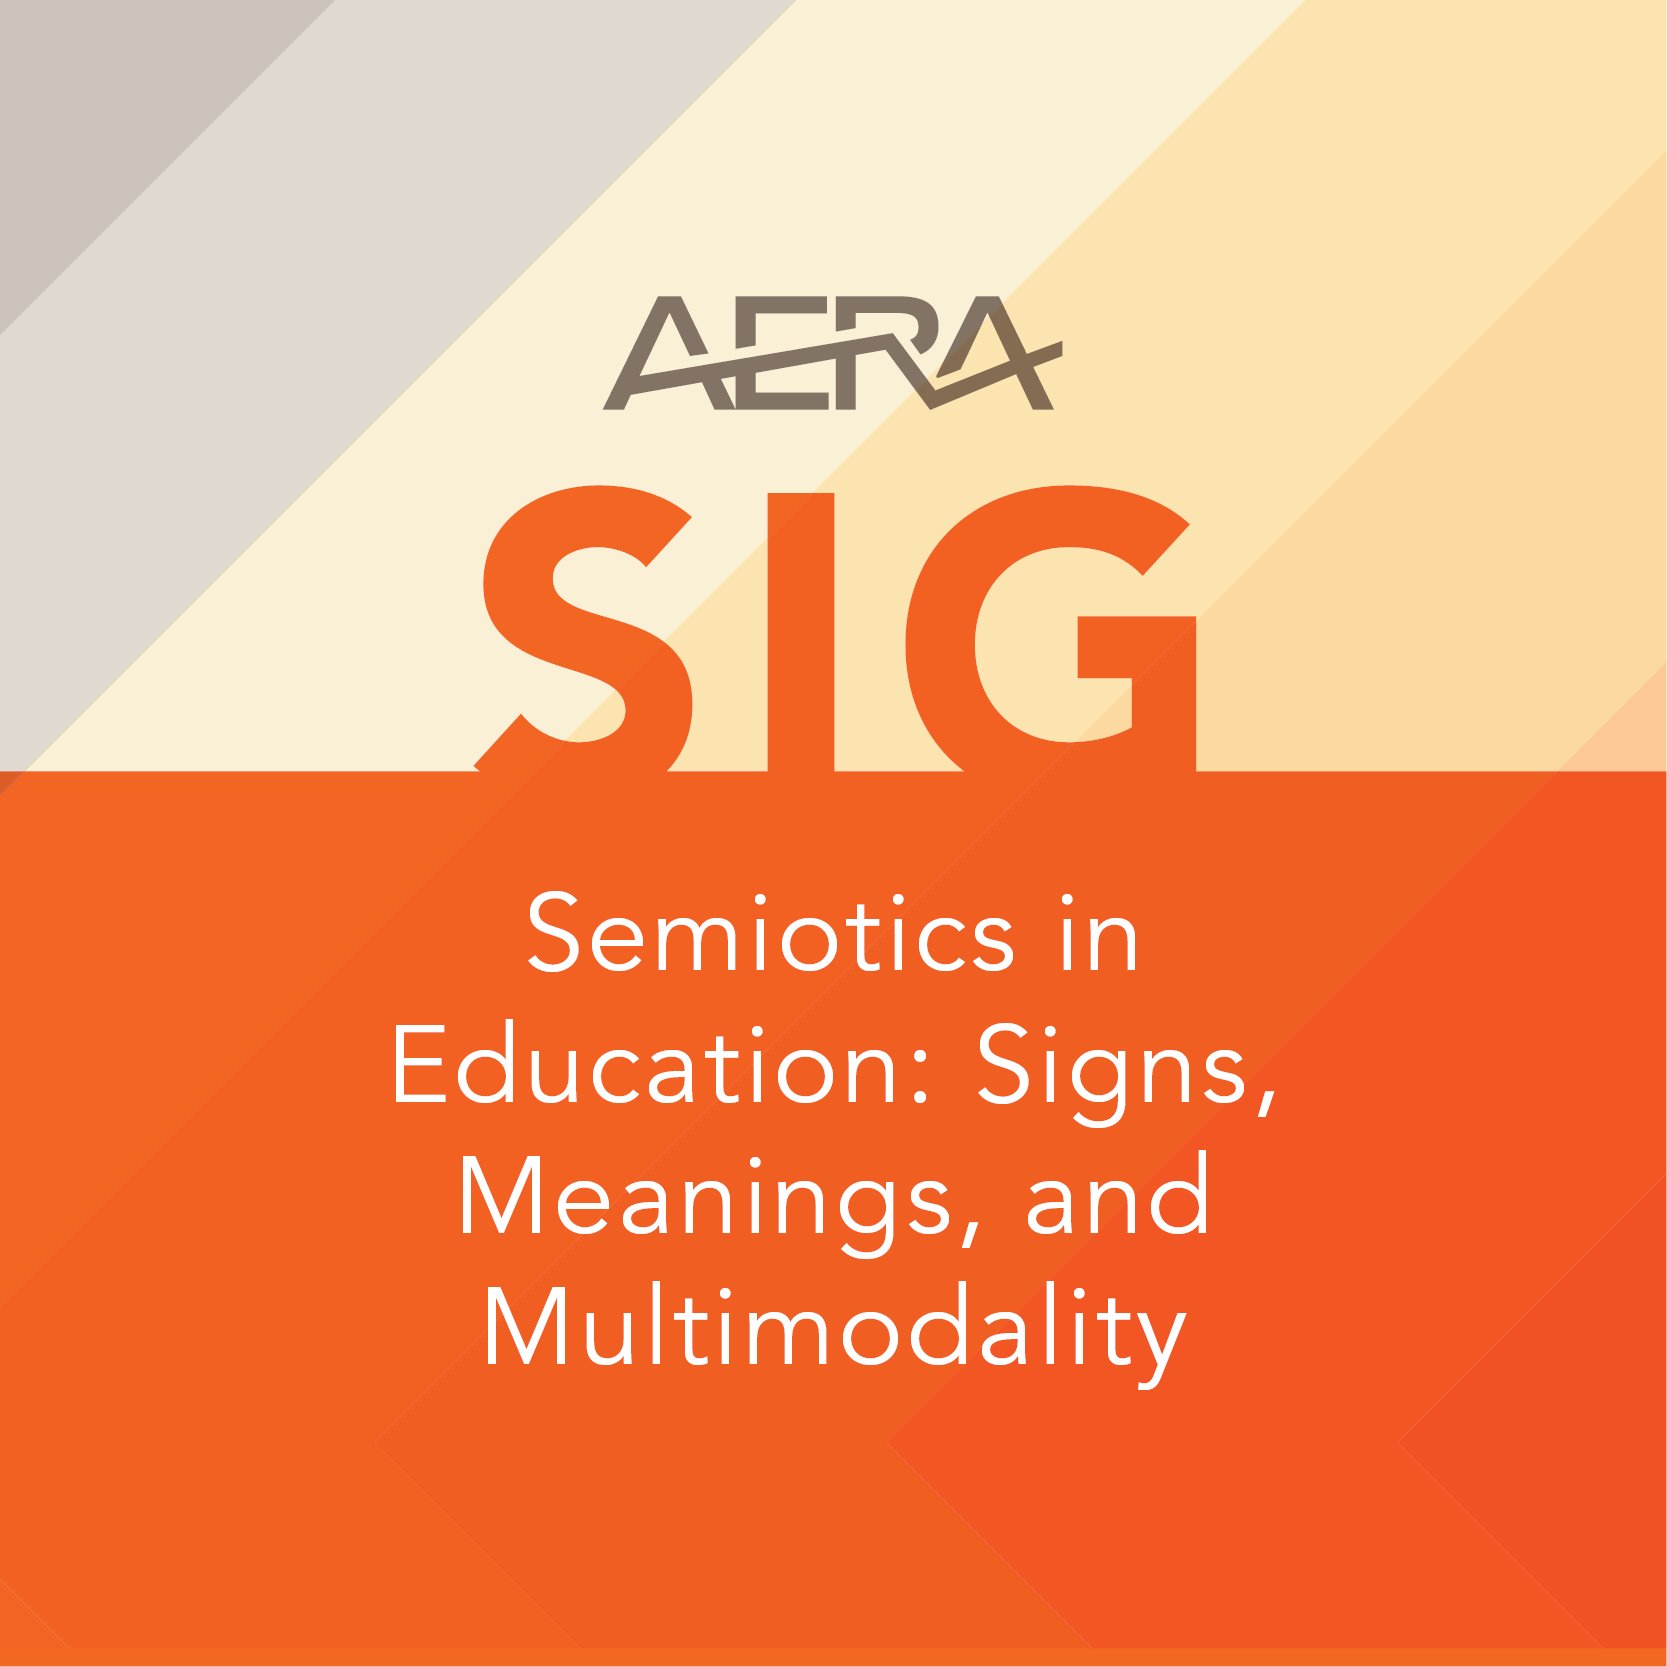 Constructing & sharing signs, meanings & meaning making processes in education. Tweets represent AERA SIG-Semiotics in Education: Signs, Meaning & Multimodality